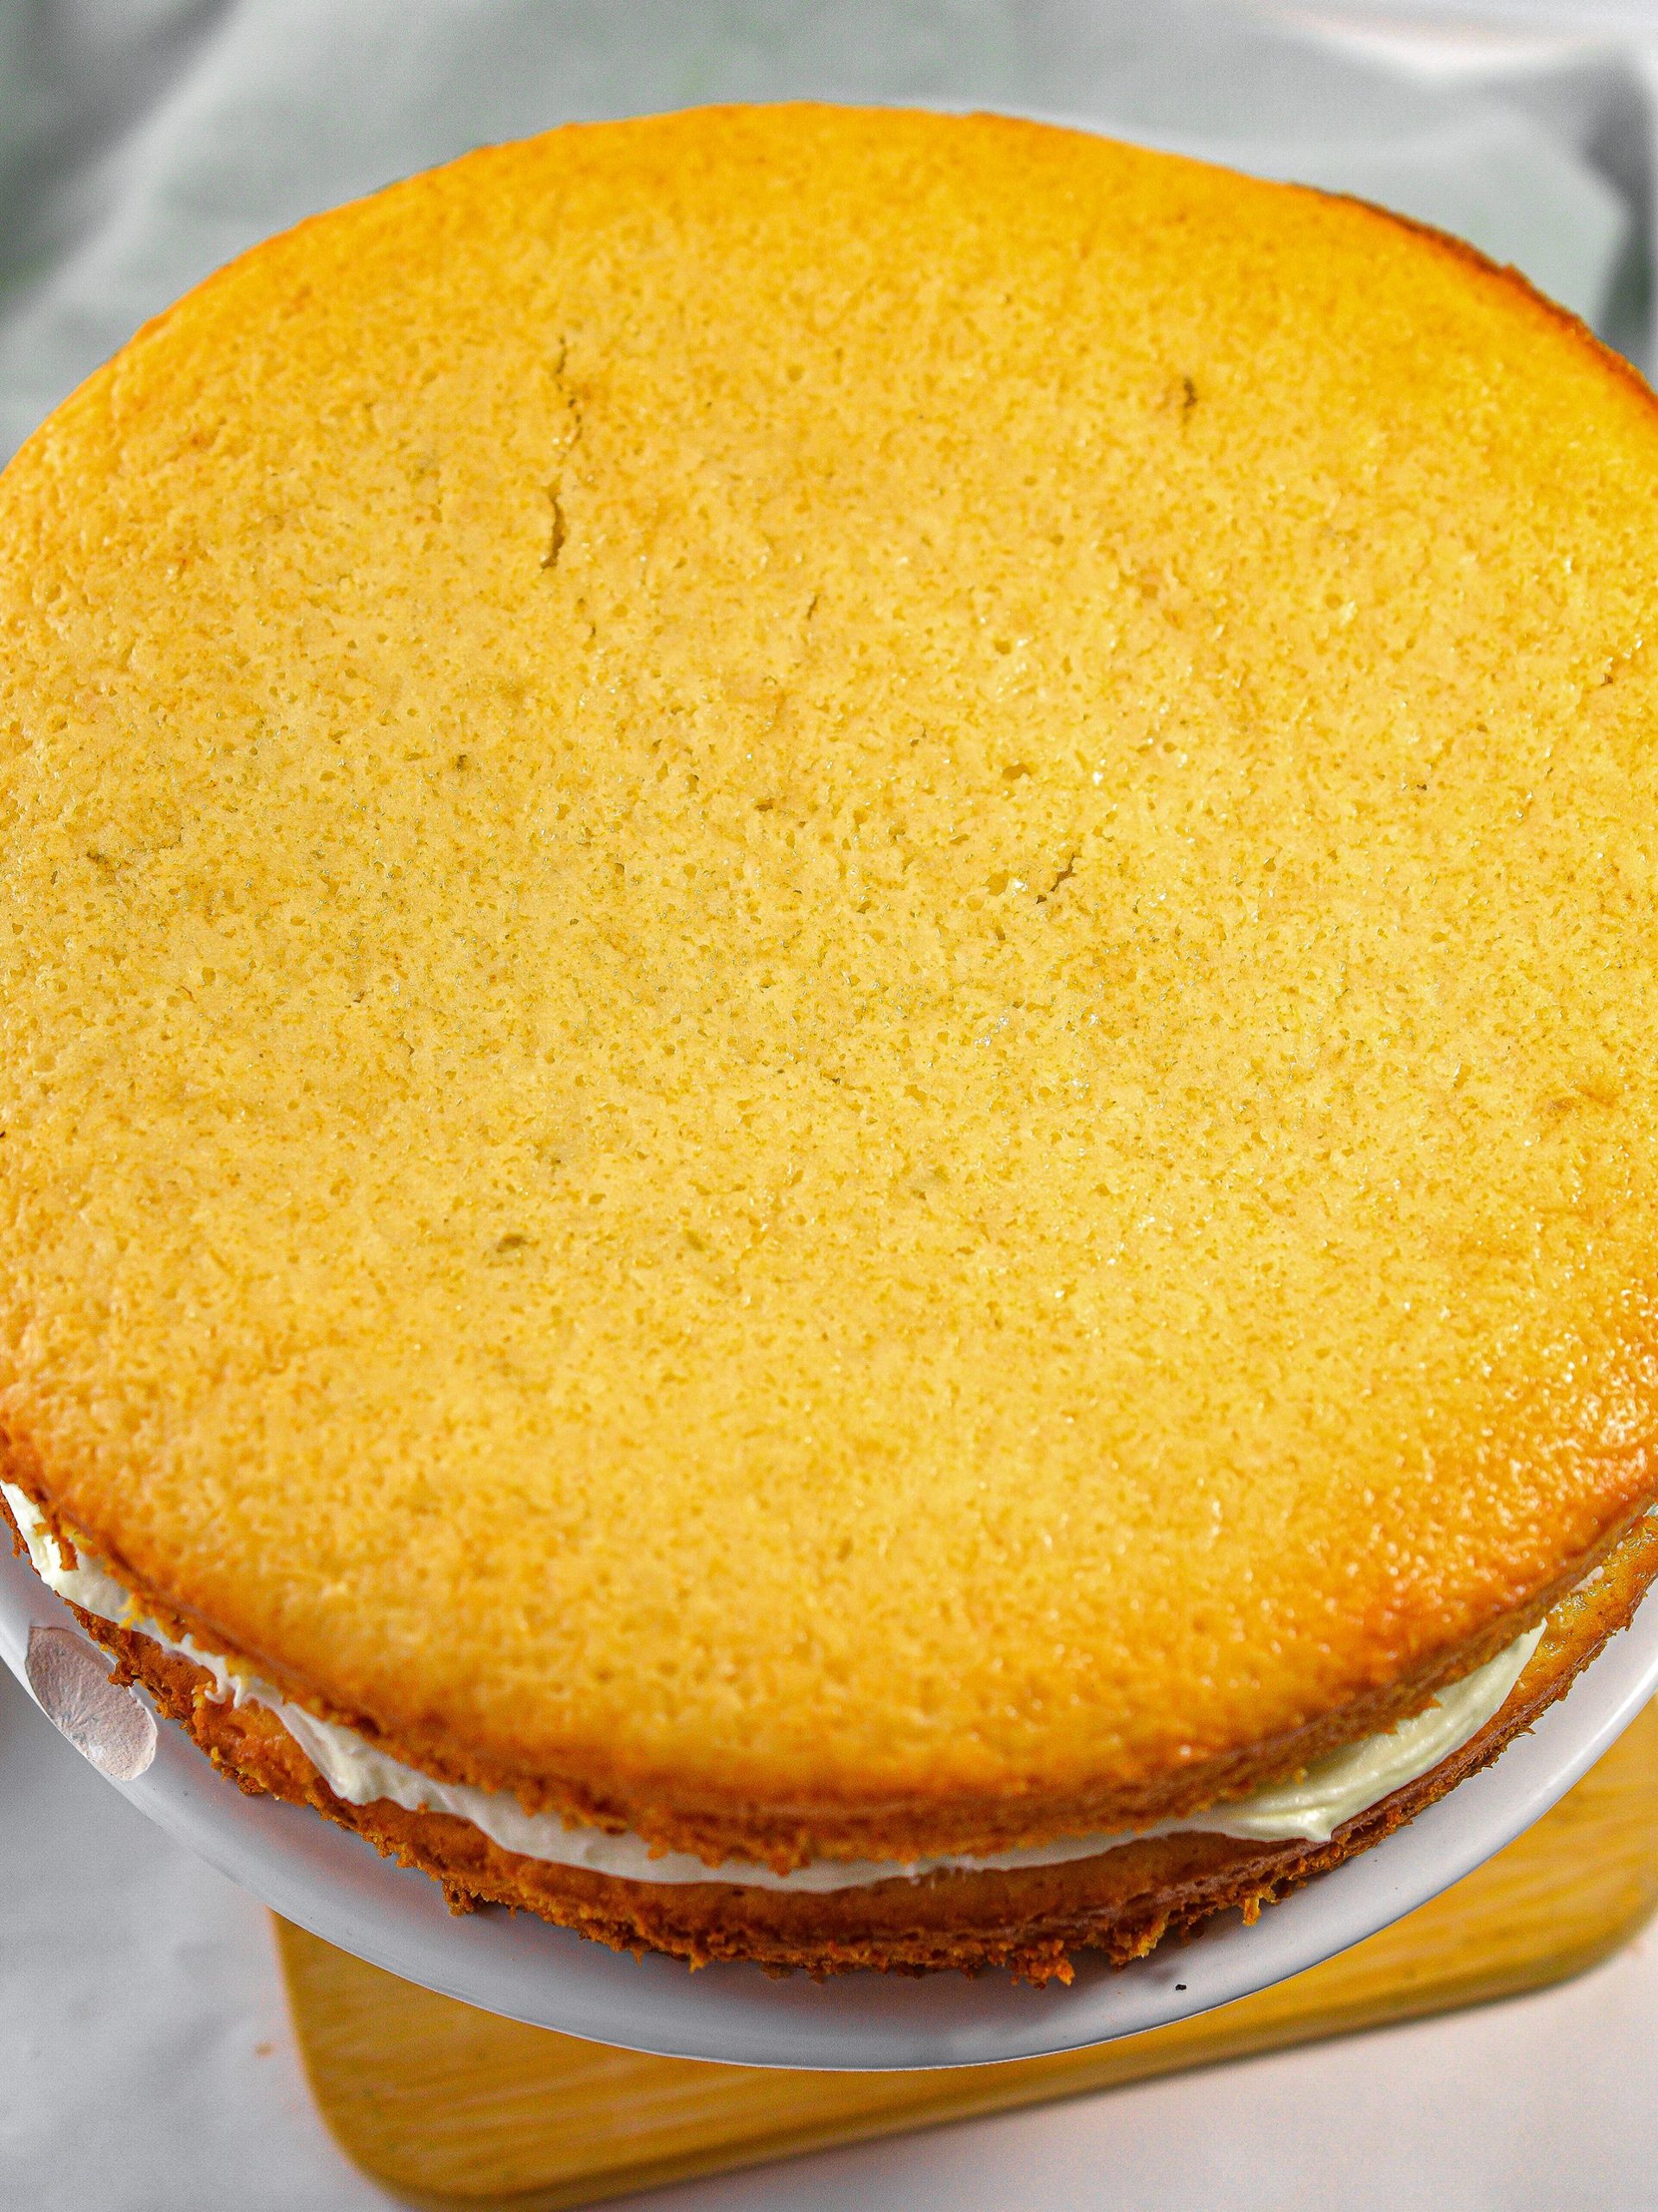 Put the other layer of cake on top of the first, and continue to ice the top and sides of the cake completely.